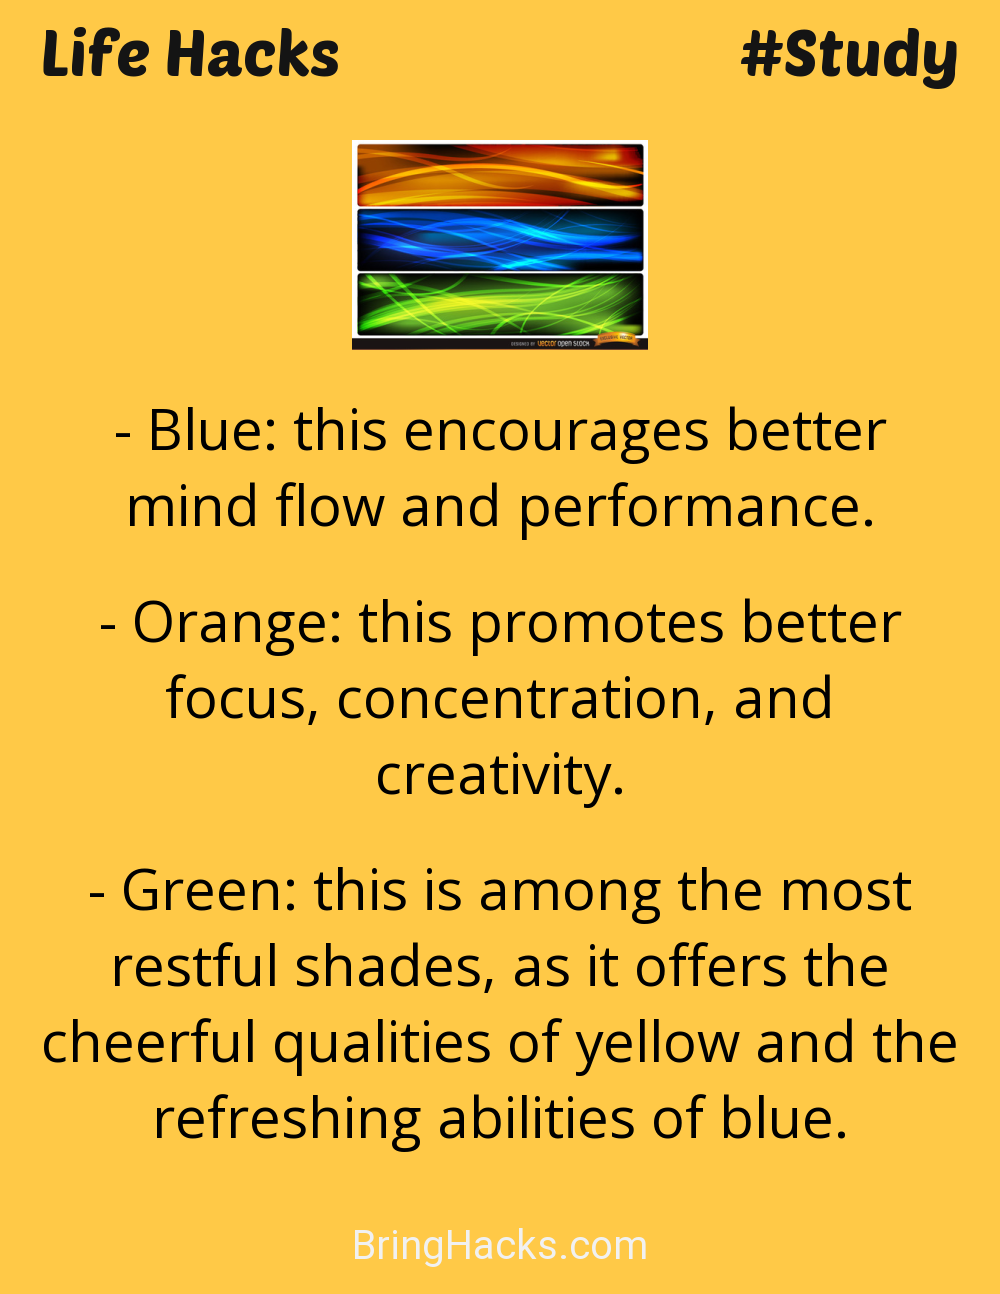 Life Hacks: - Blue: this encourages better mind flow and performance.Orange: this promotes better focus, concentration, and creativity.Green: this is among the most restful shades, as it offers the cheerful qualities of yellow and the refreshing abilities of blue.